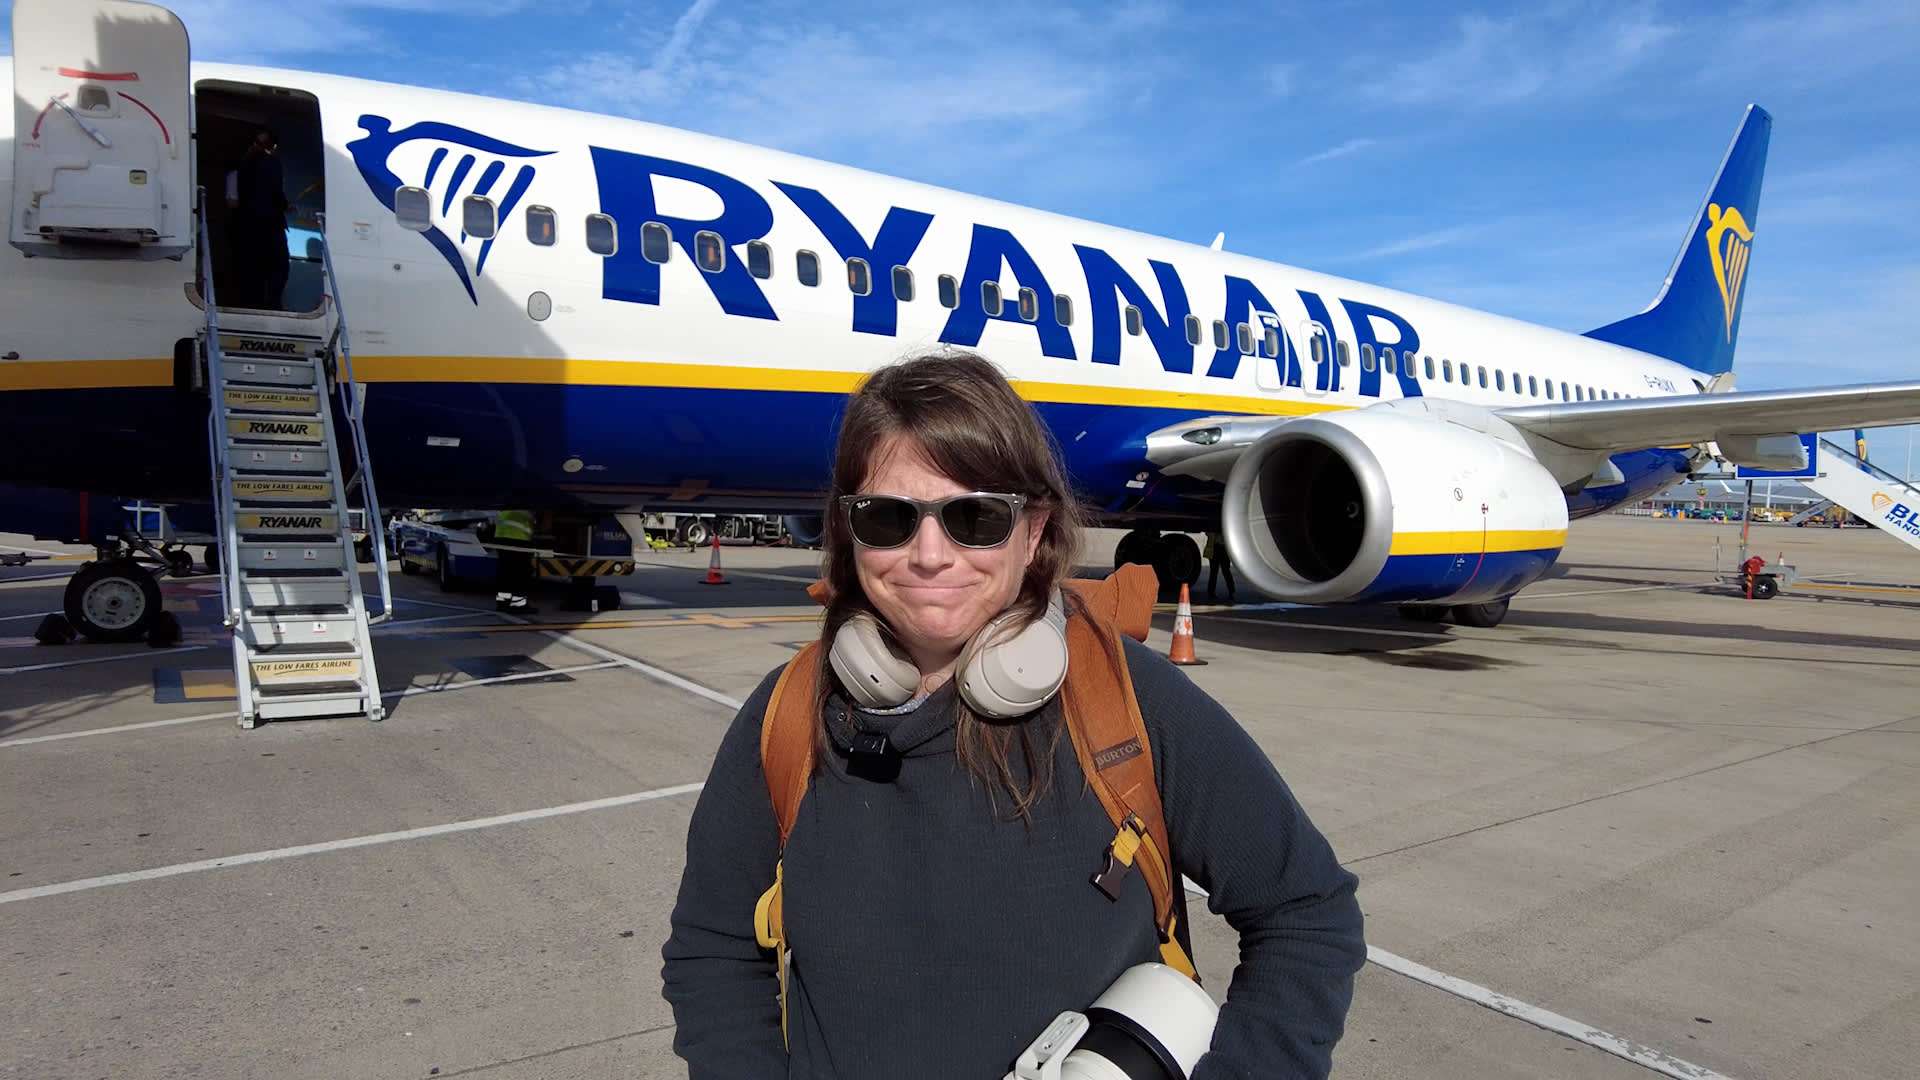 The business behind budget airlines like Ryanair and Spirit